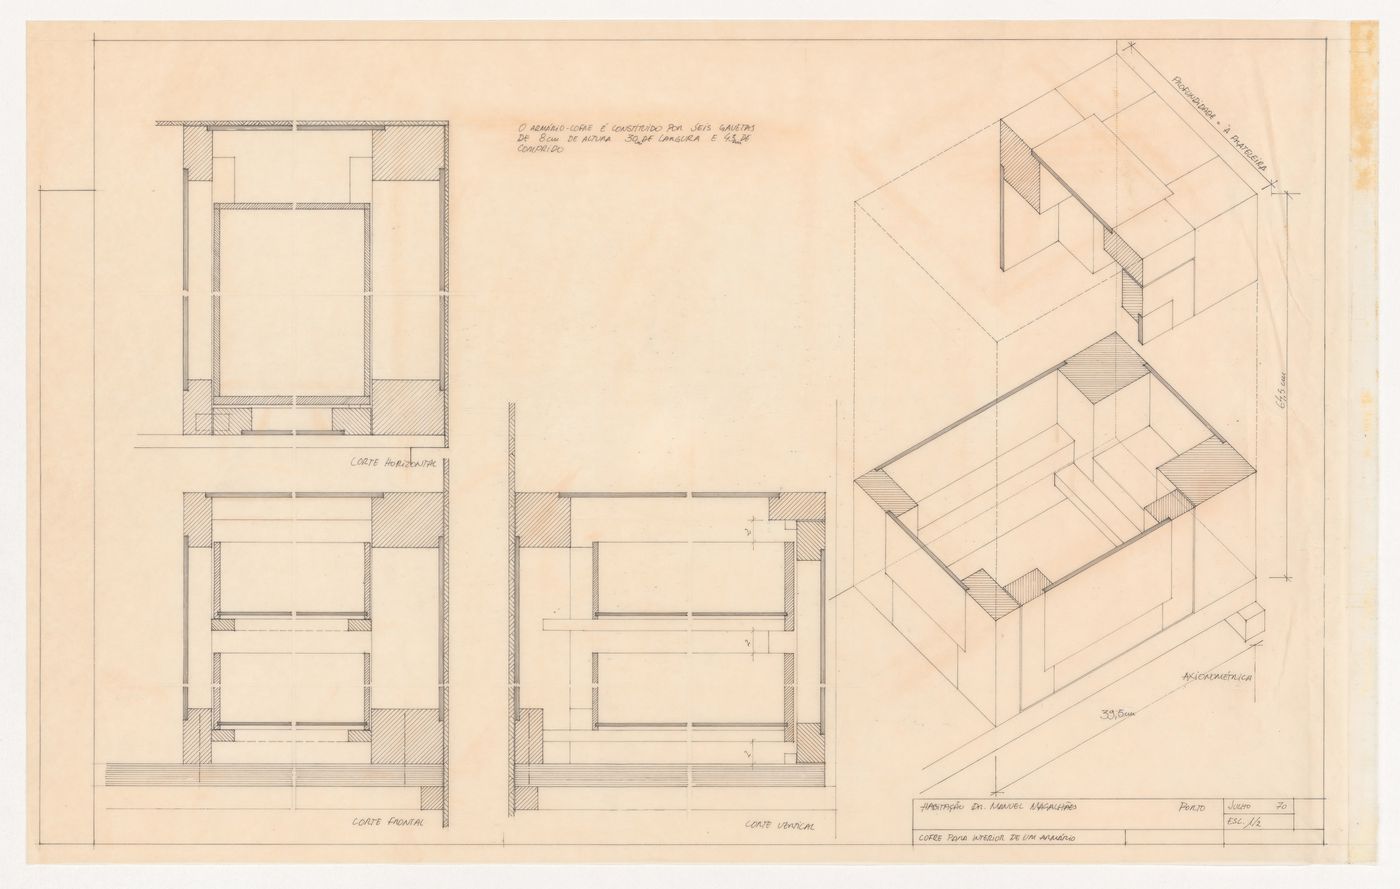 Sections and axonometric for safe for Casa Manuel Magalhães, Porto